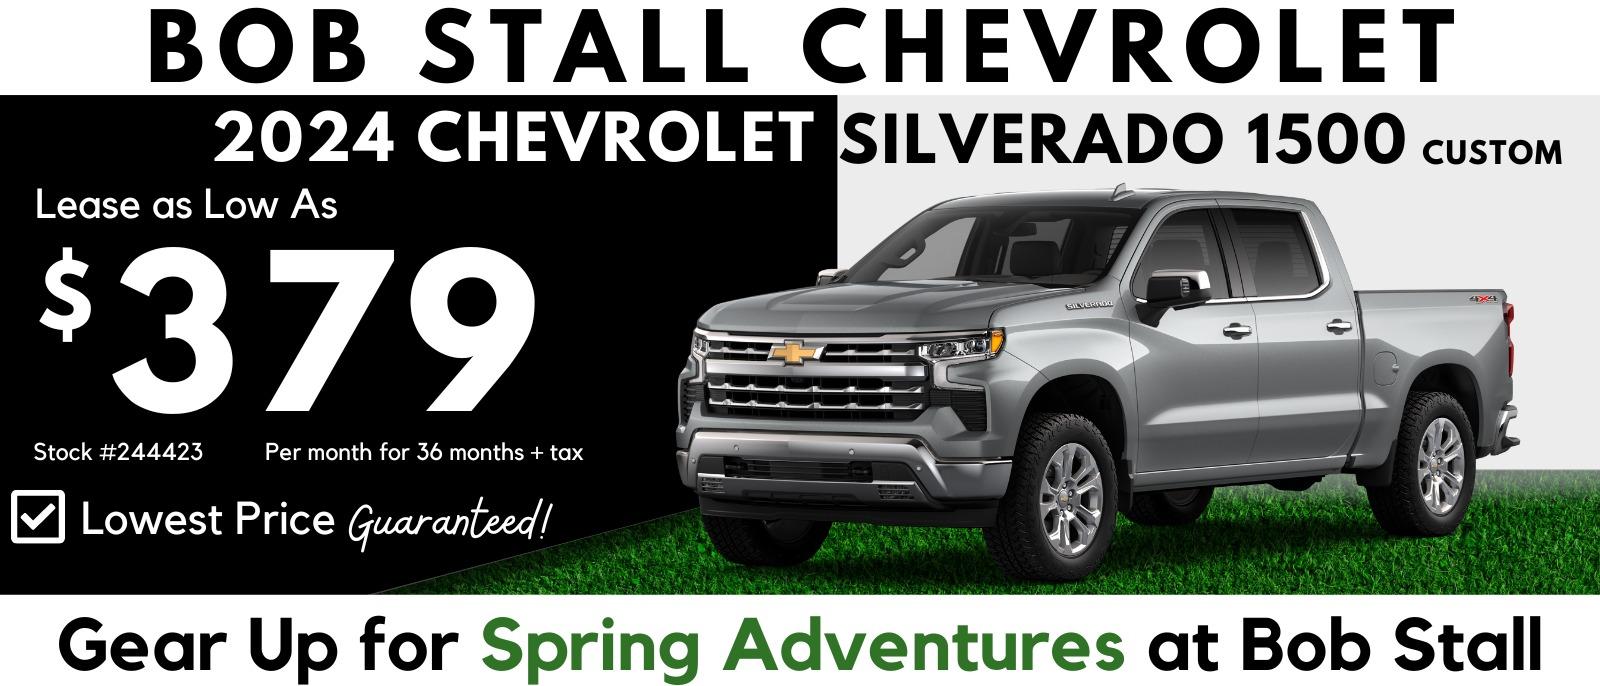 Int Silverado 2024  Savings - Lease as low as $379 per month for 36 Months